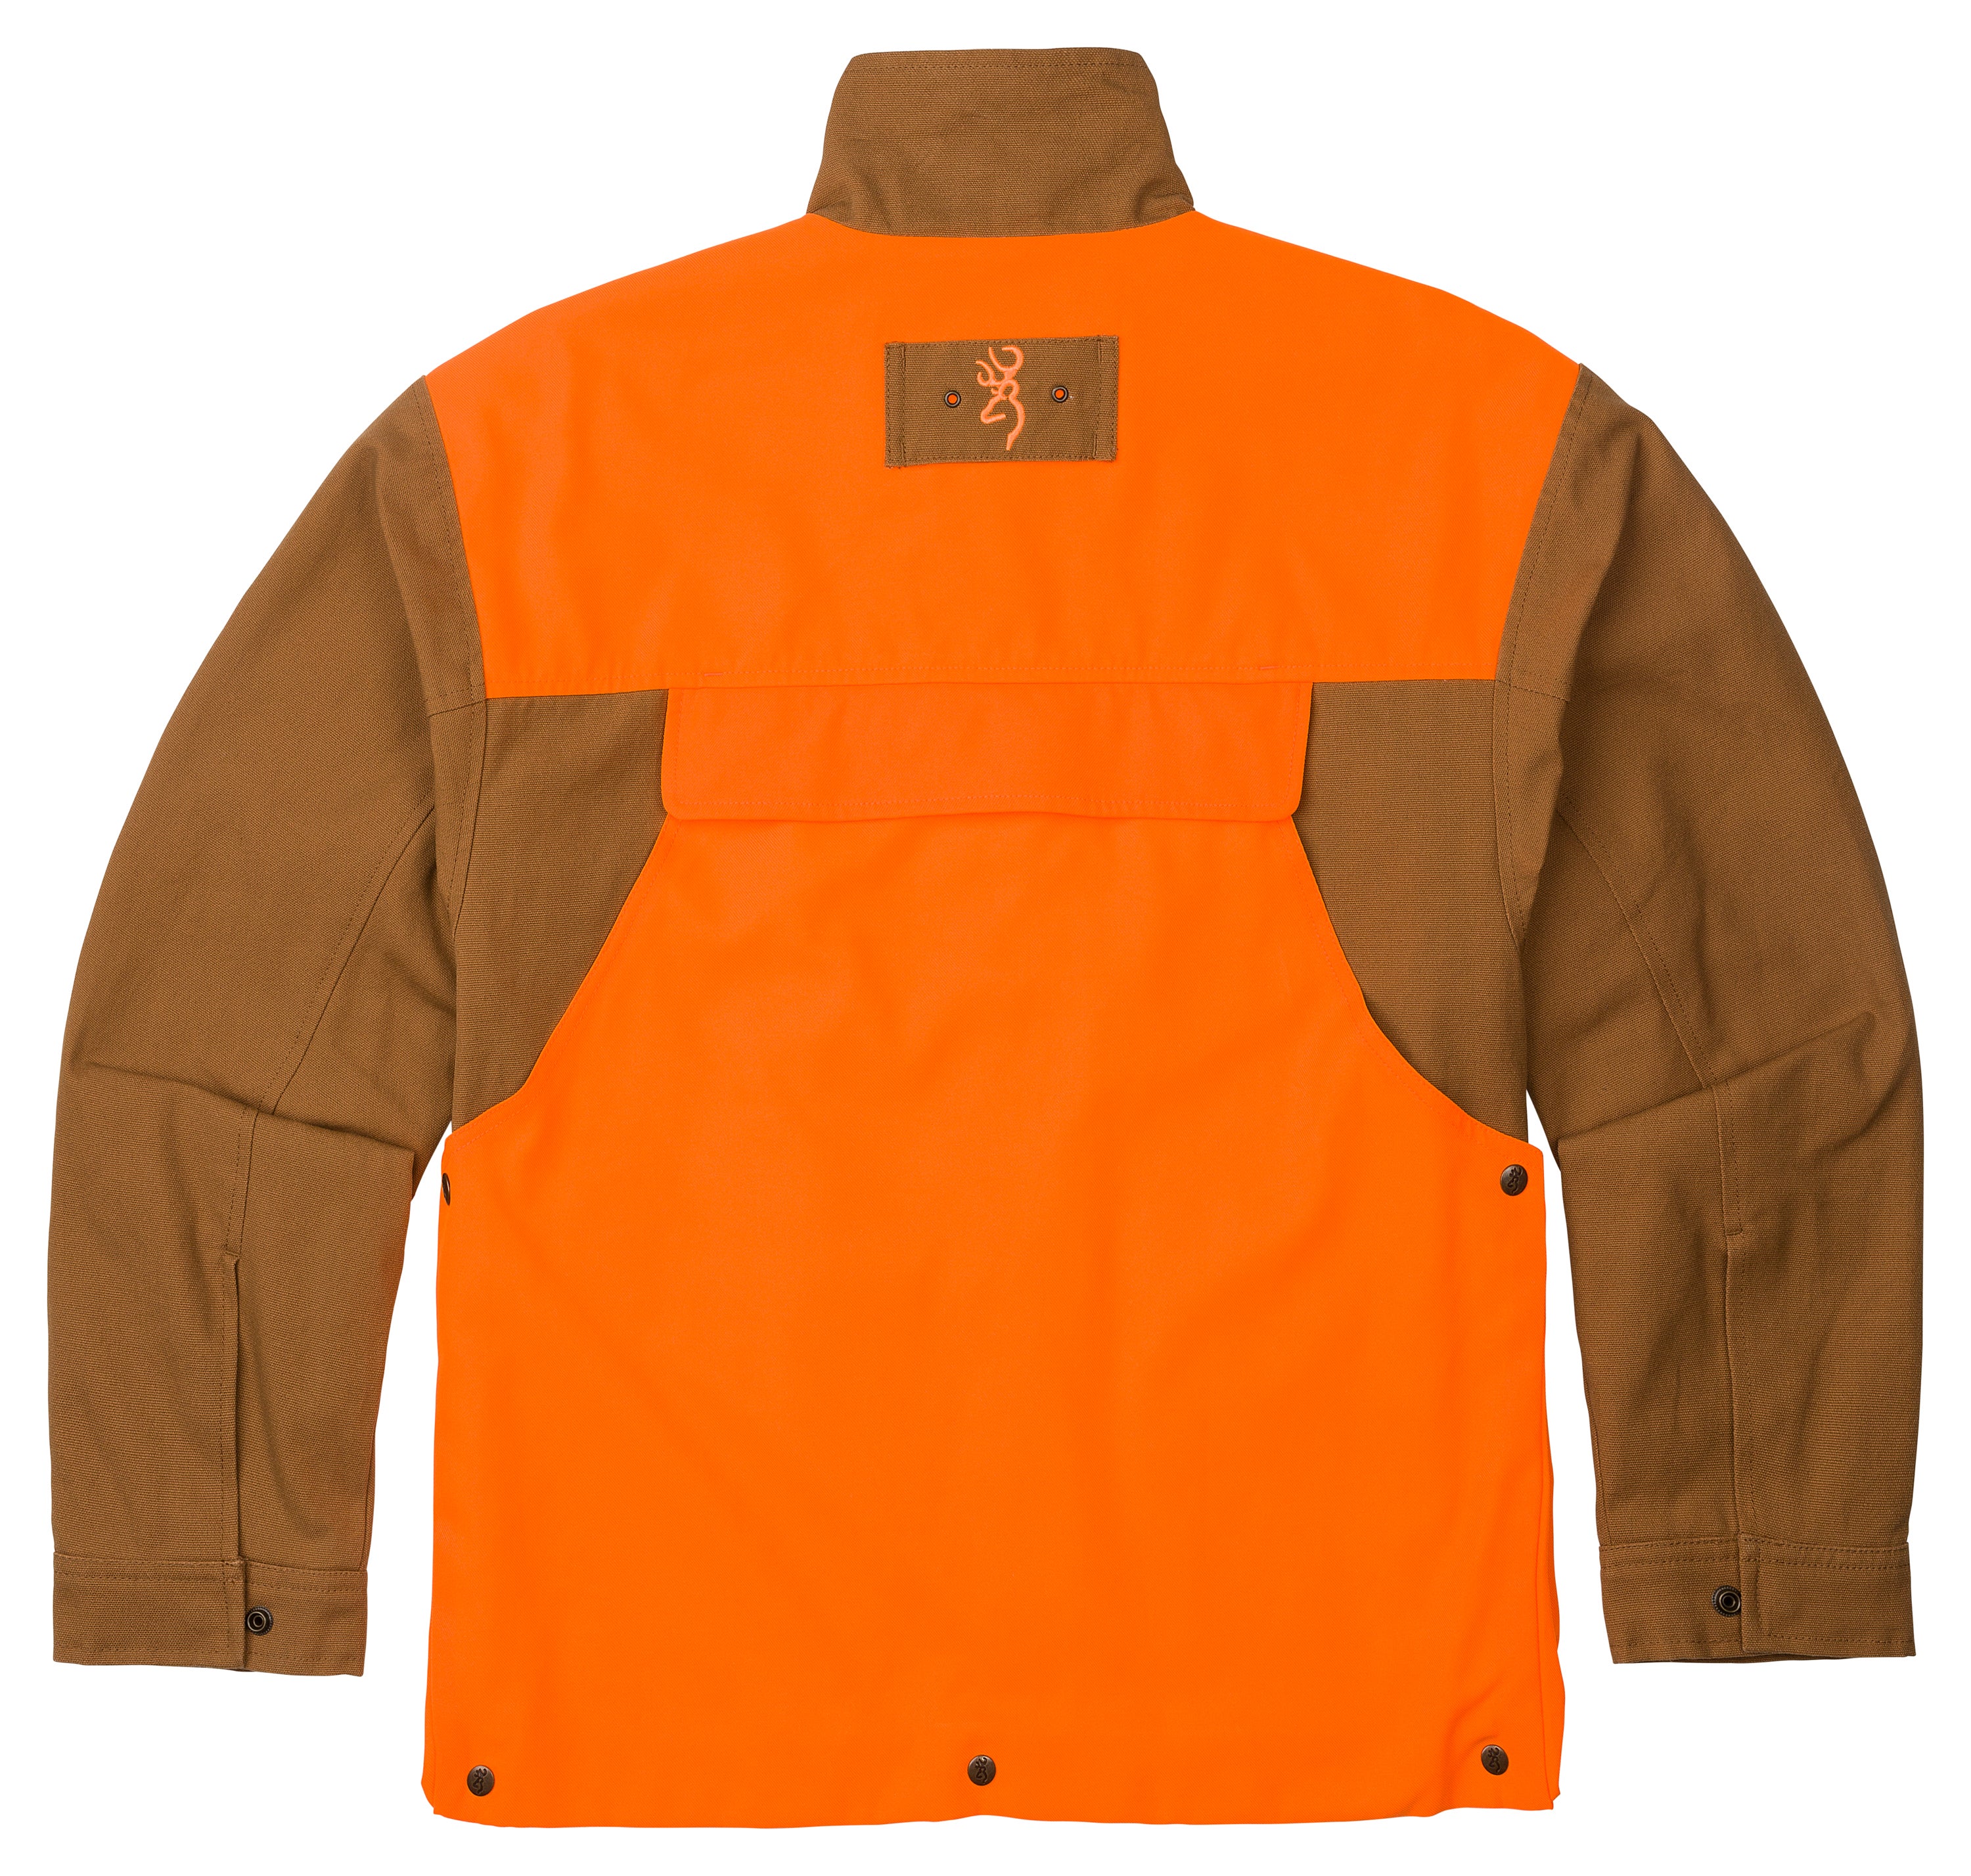 Browning NTS Upland Shirt in Tan and Blaze Orange Size Large 